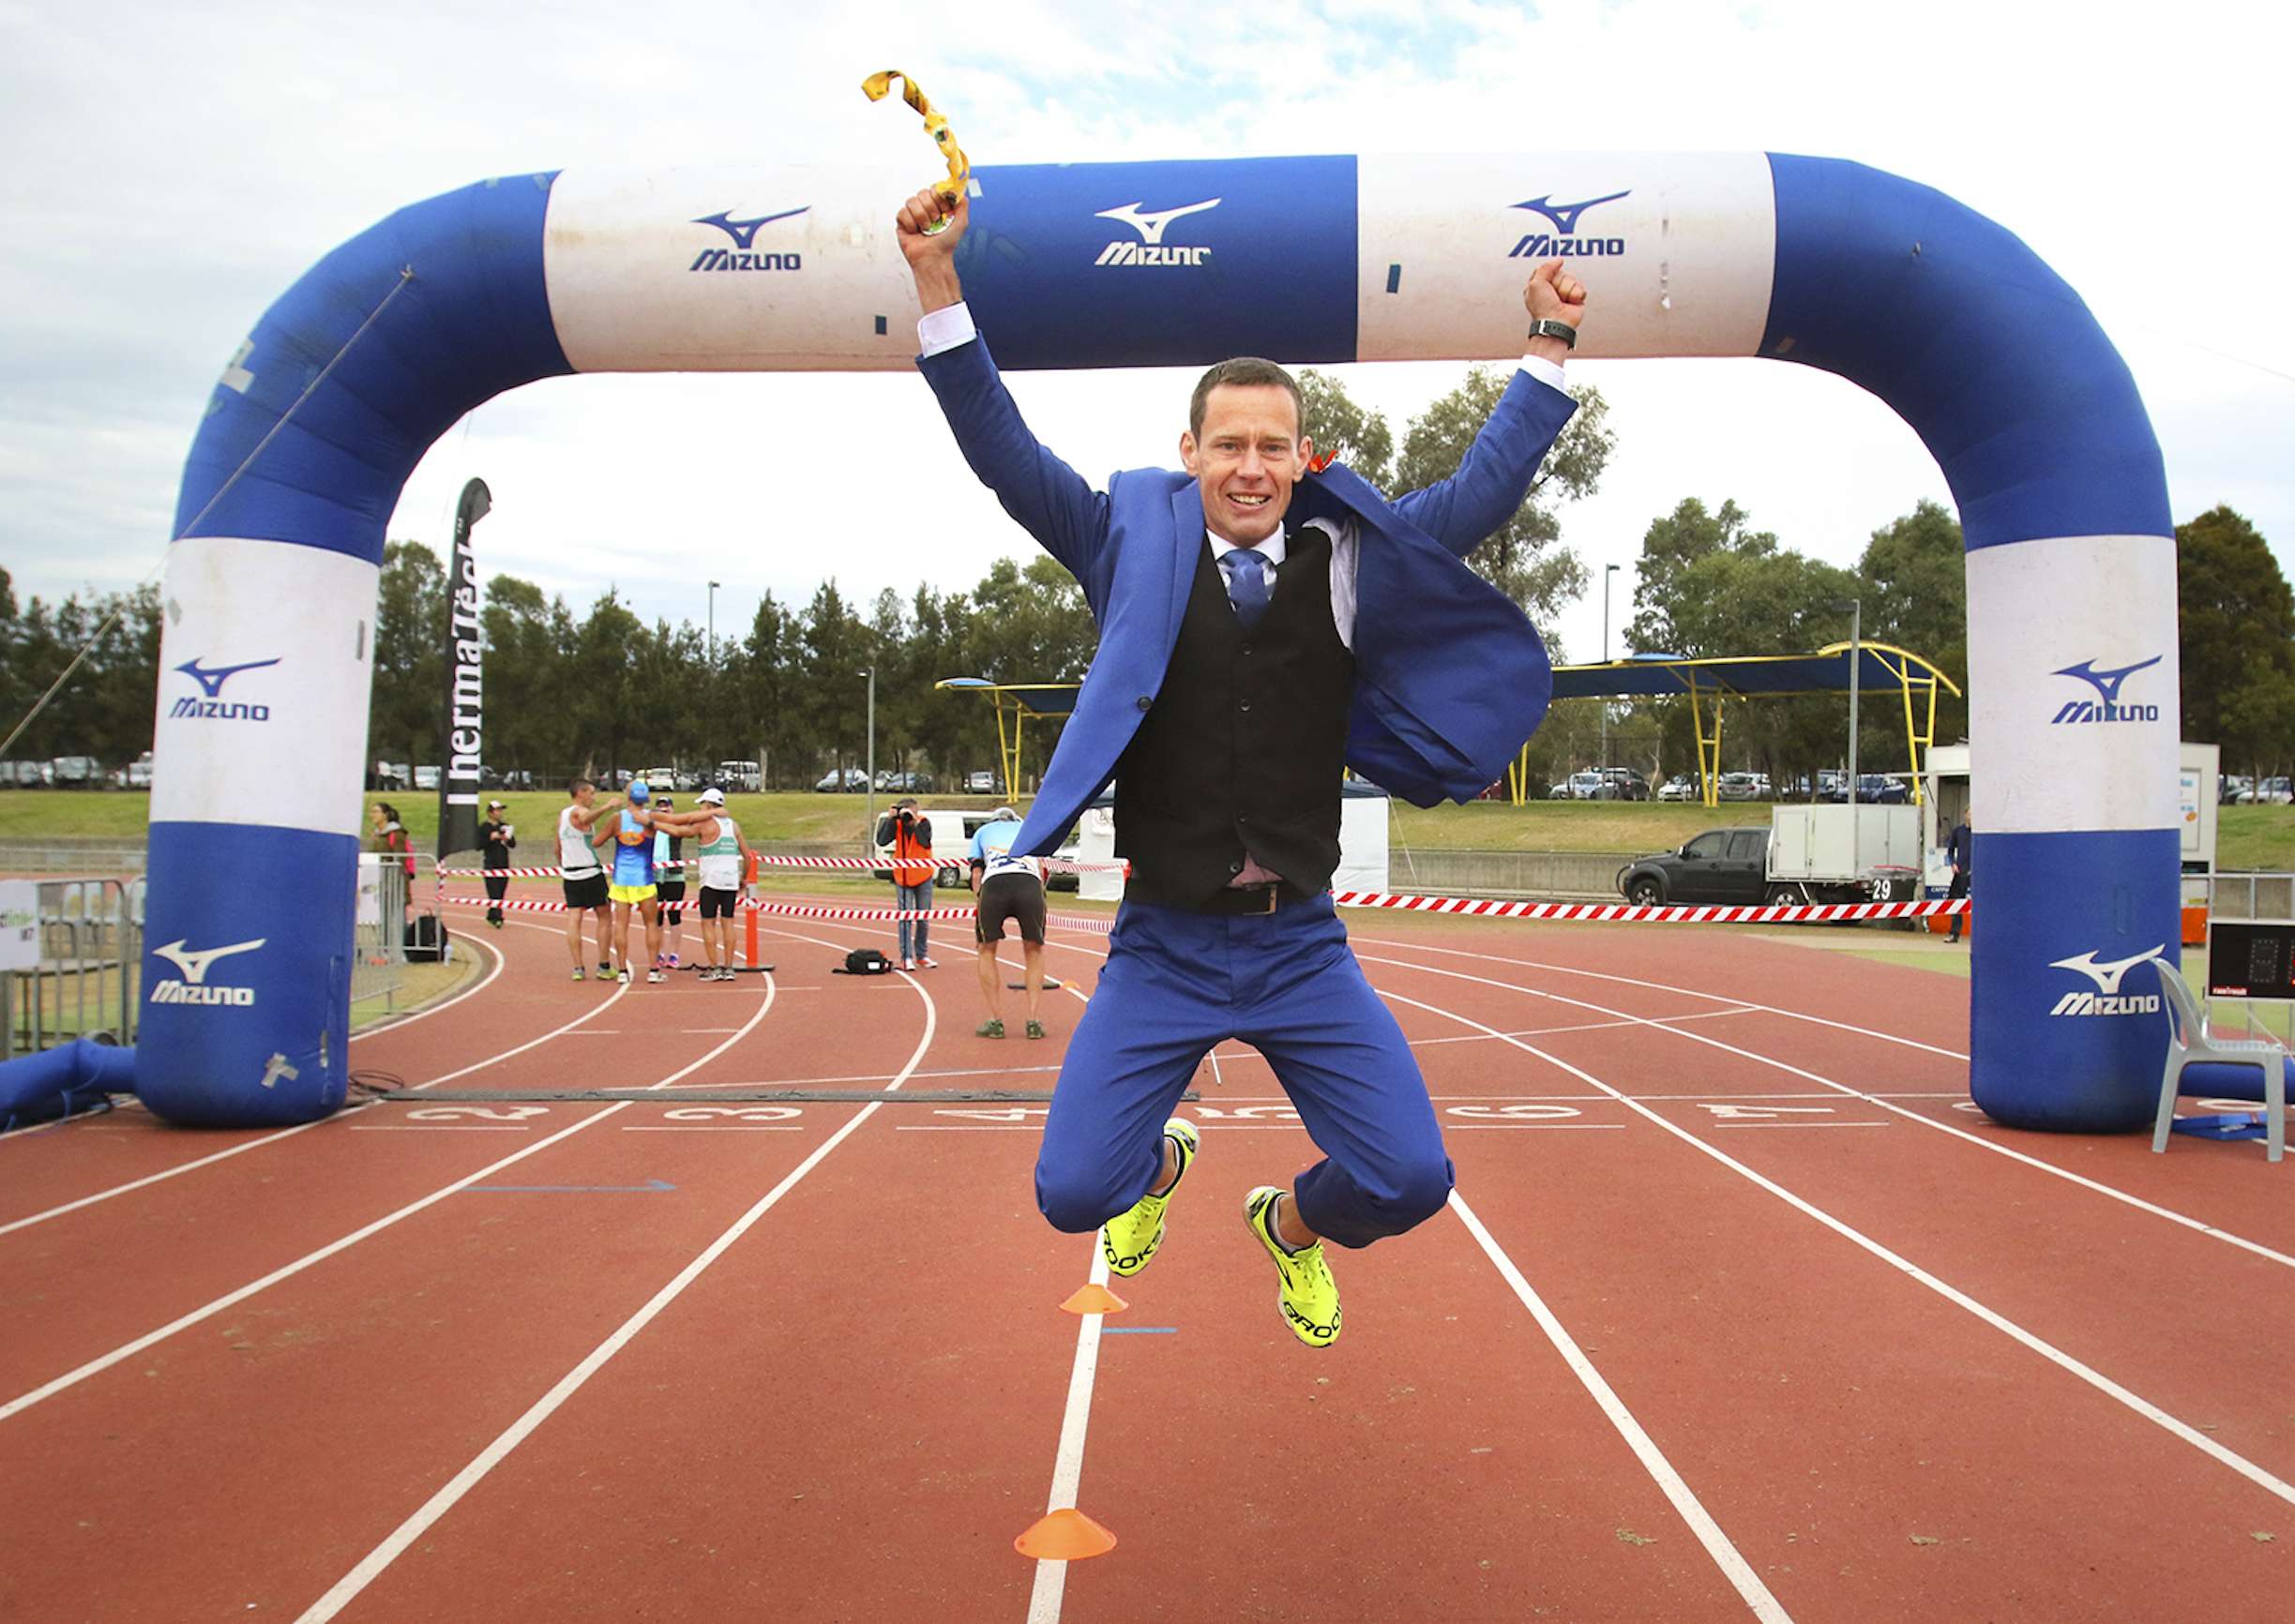 Mike Tozer celebrates running a half-marathon in a three-piece suit in record time. Photo: Drew Grigg/Yet Another Idea